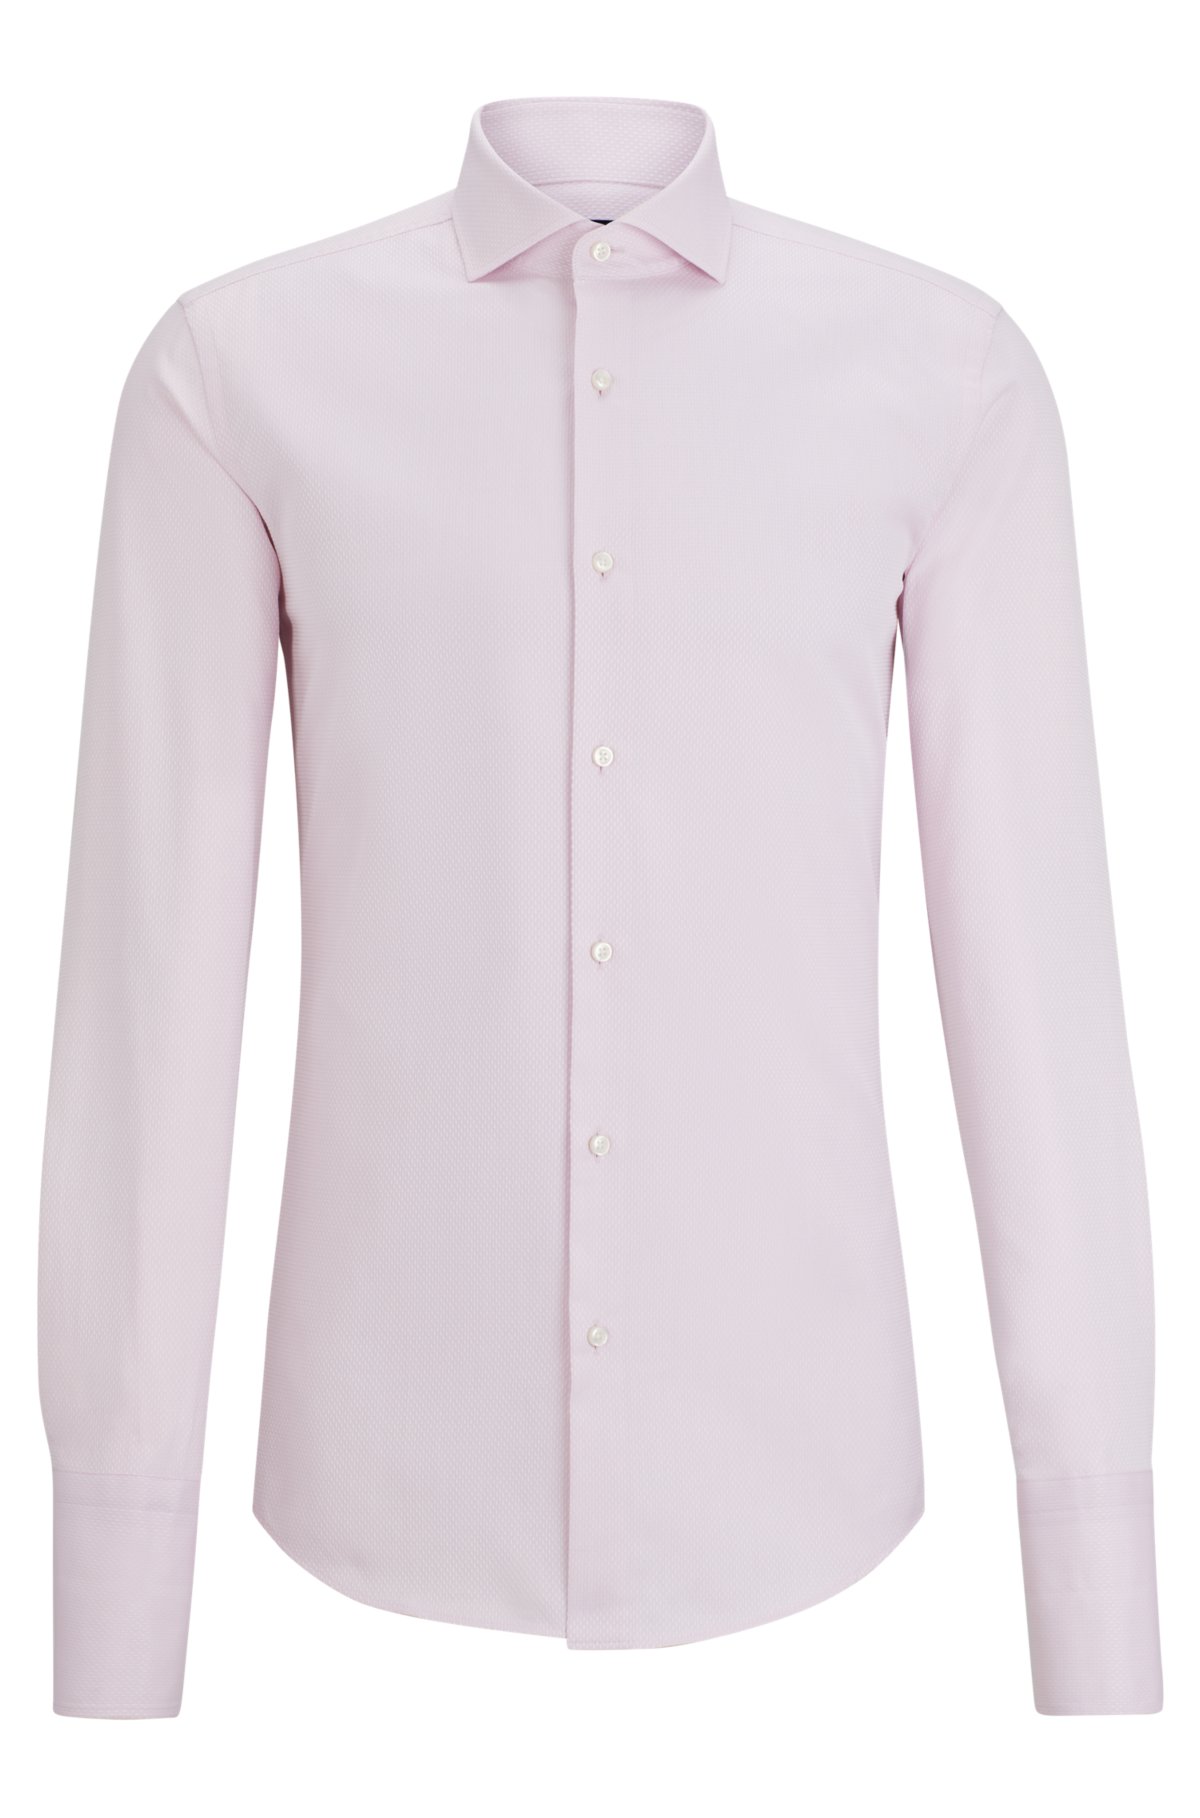 Slim-fit shirt in structured cotton with spread collar, light pink